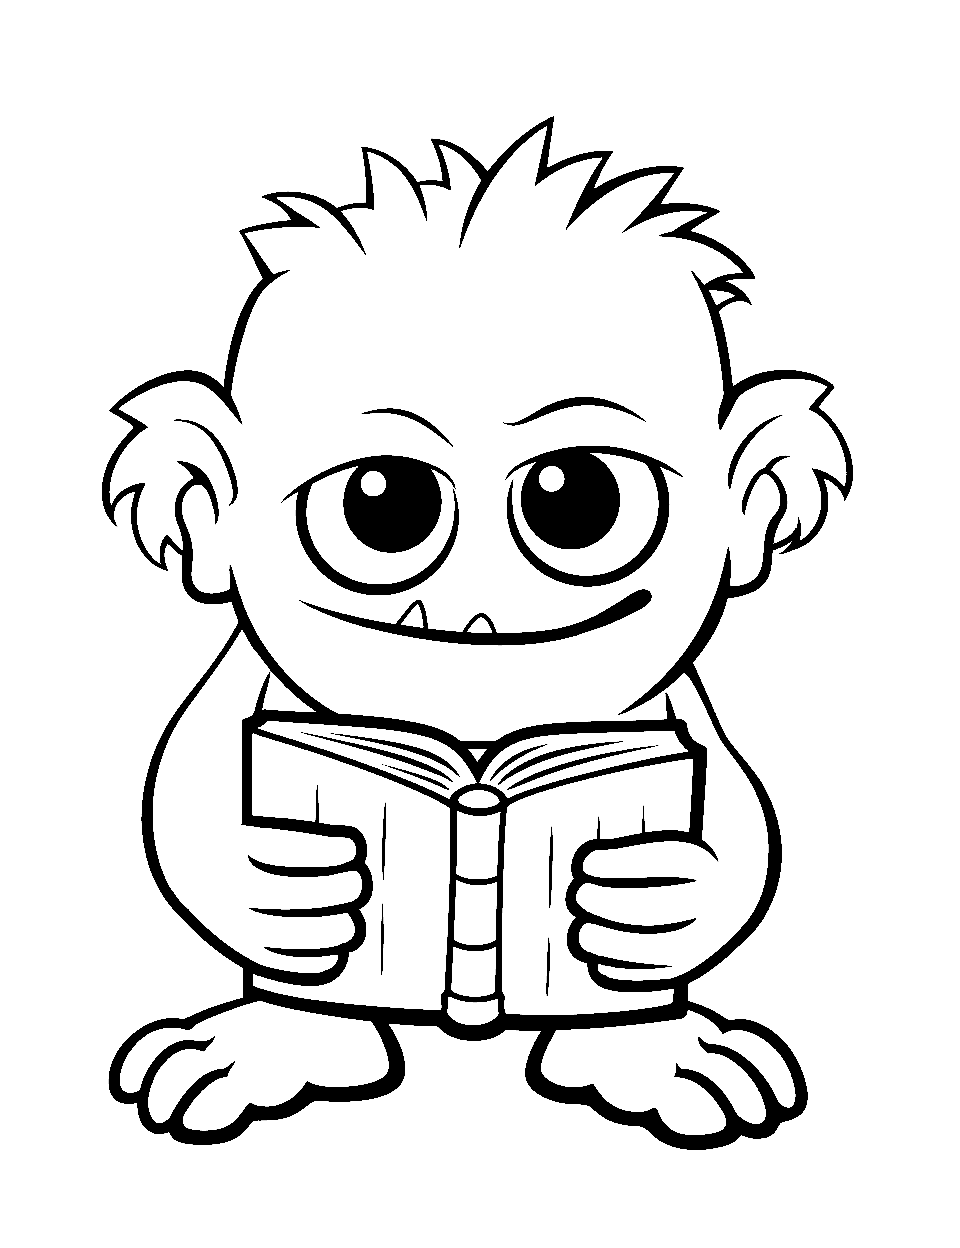 A Monster Reading Book Coloring Page - A monster standing quietly and reading a book.